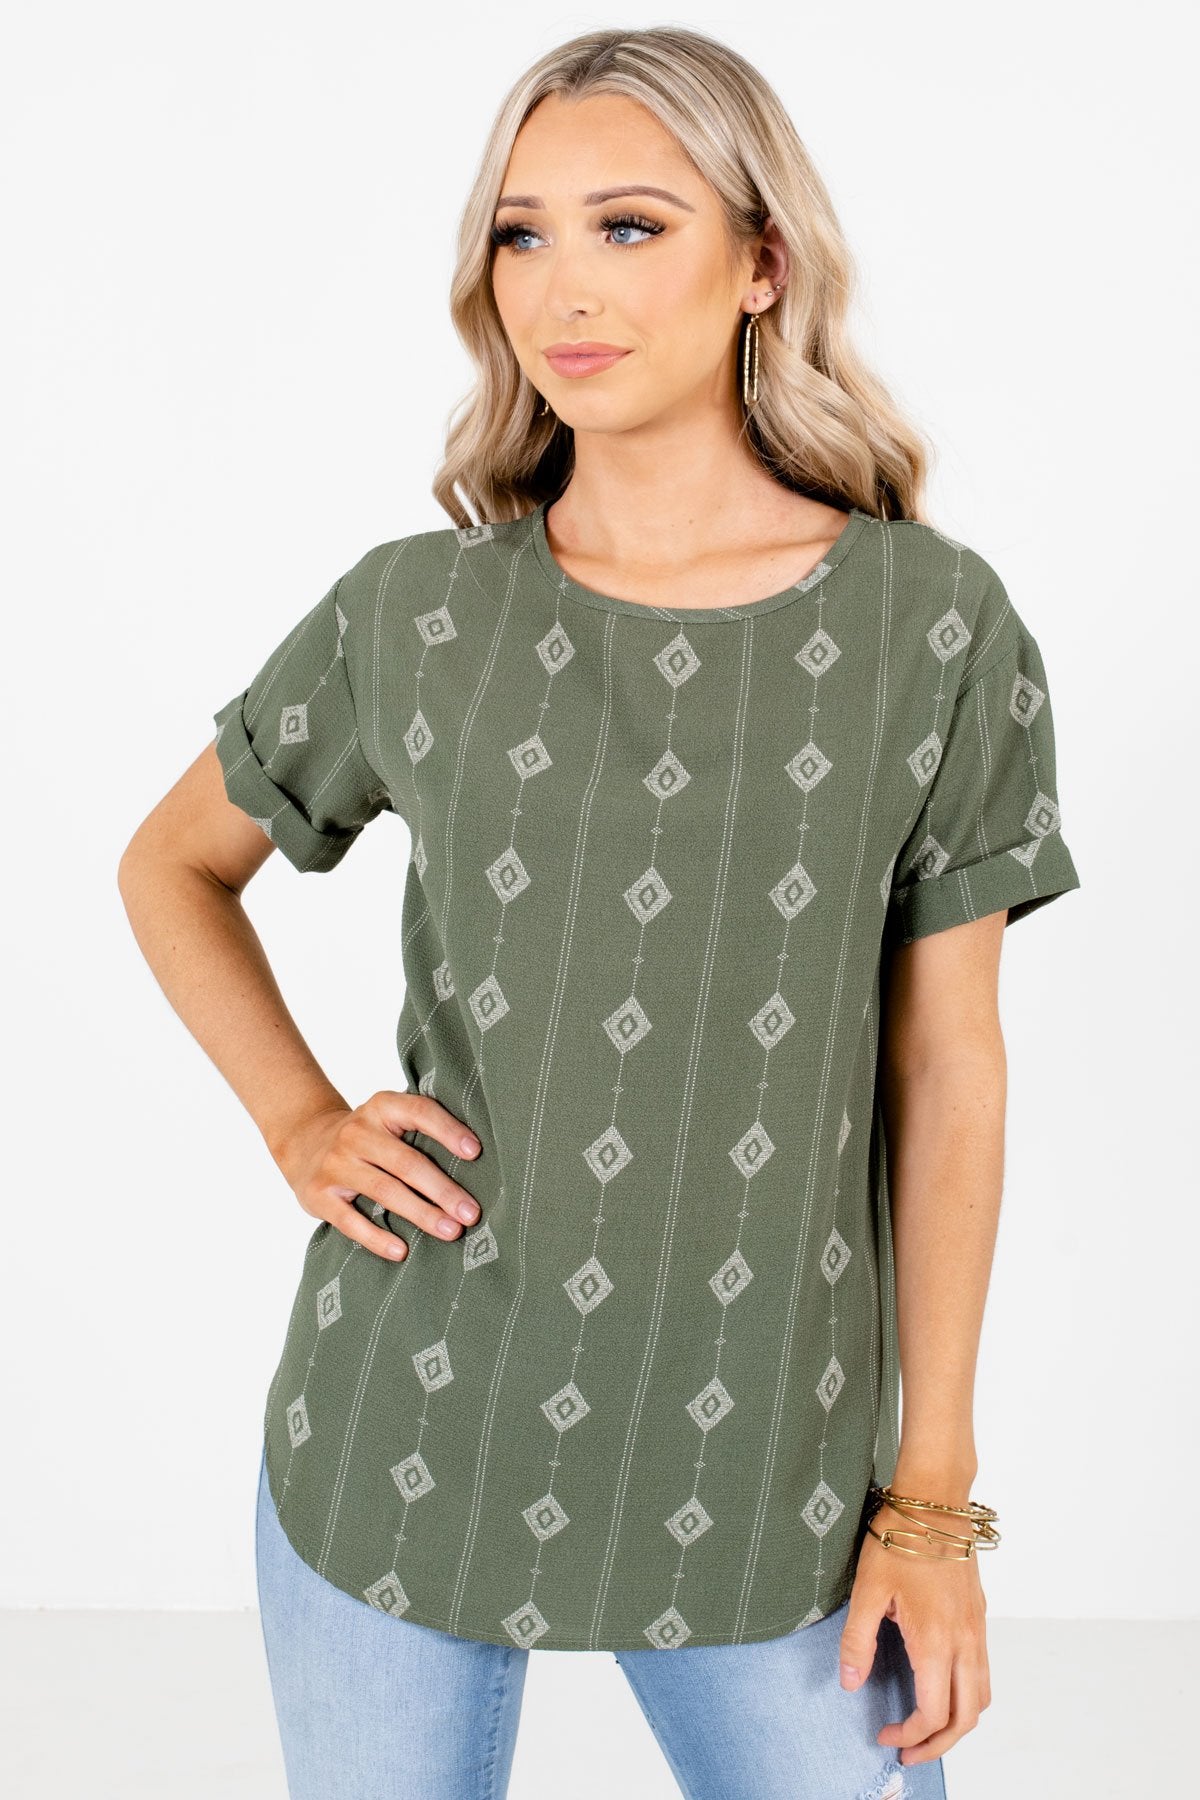 Women’s Sage Green High-Quality Lightweight Material Boutique Top